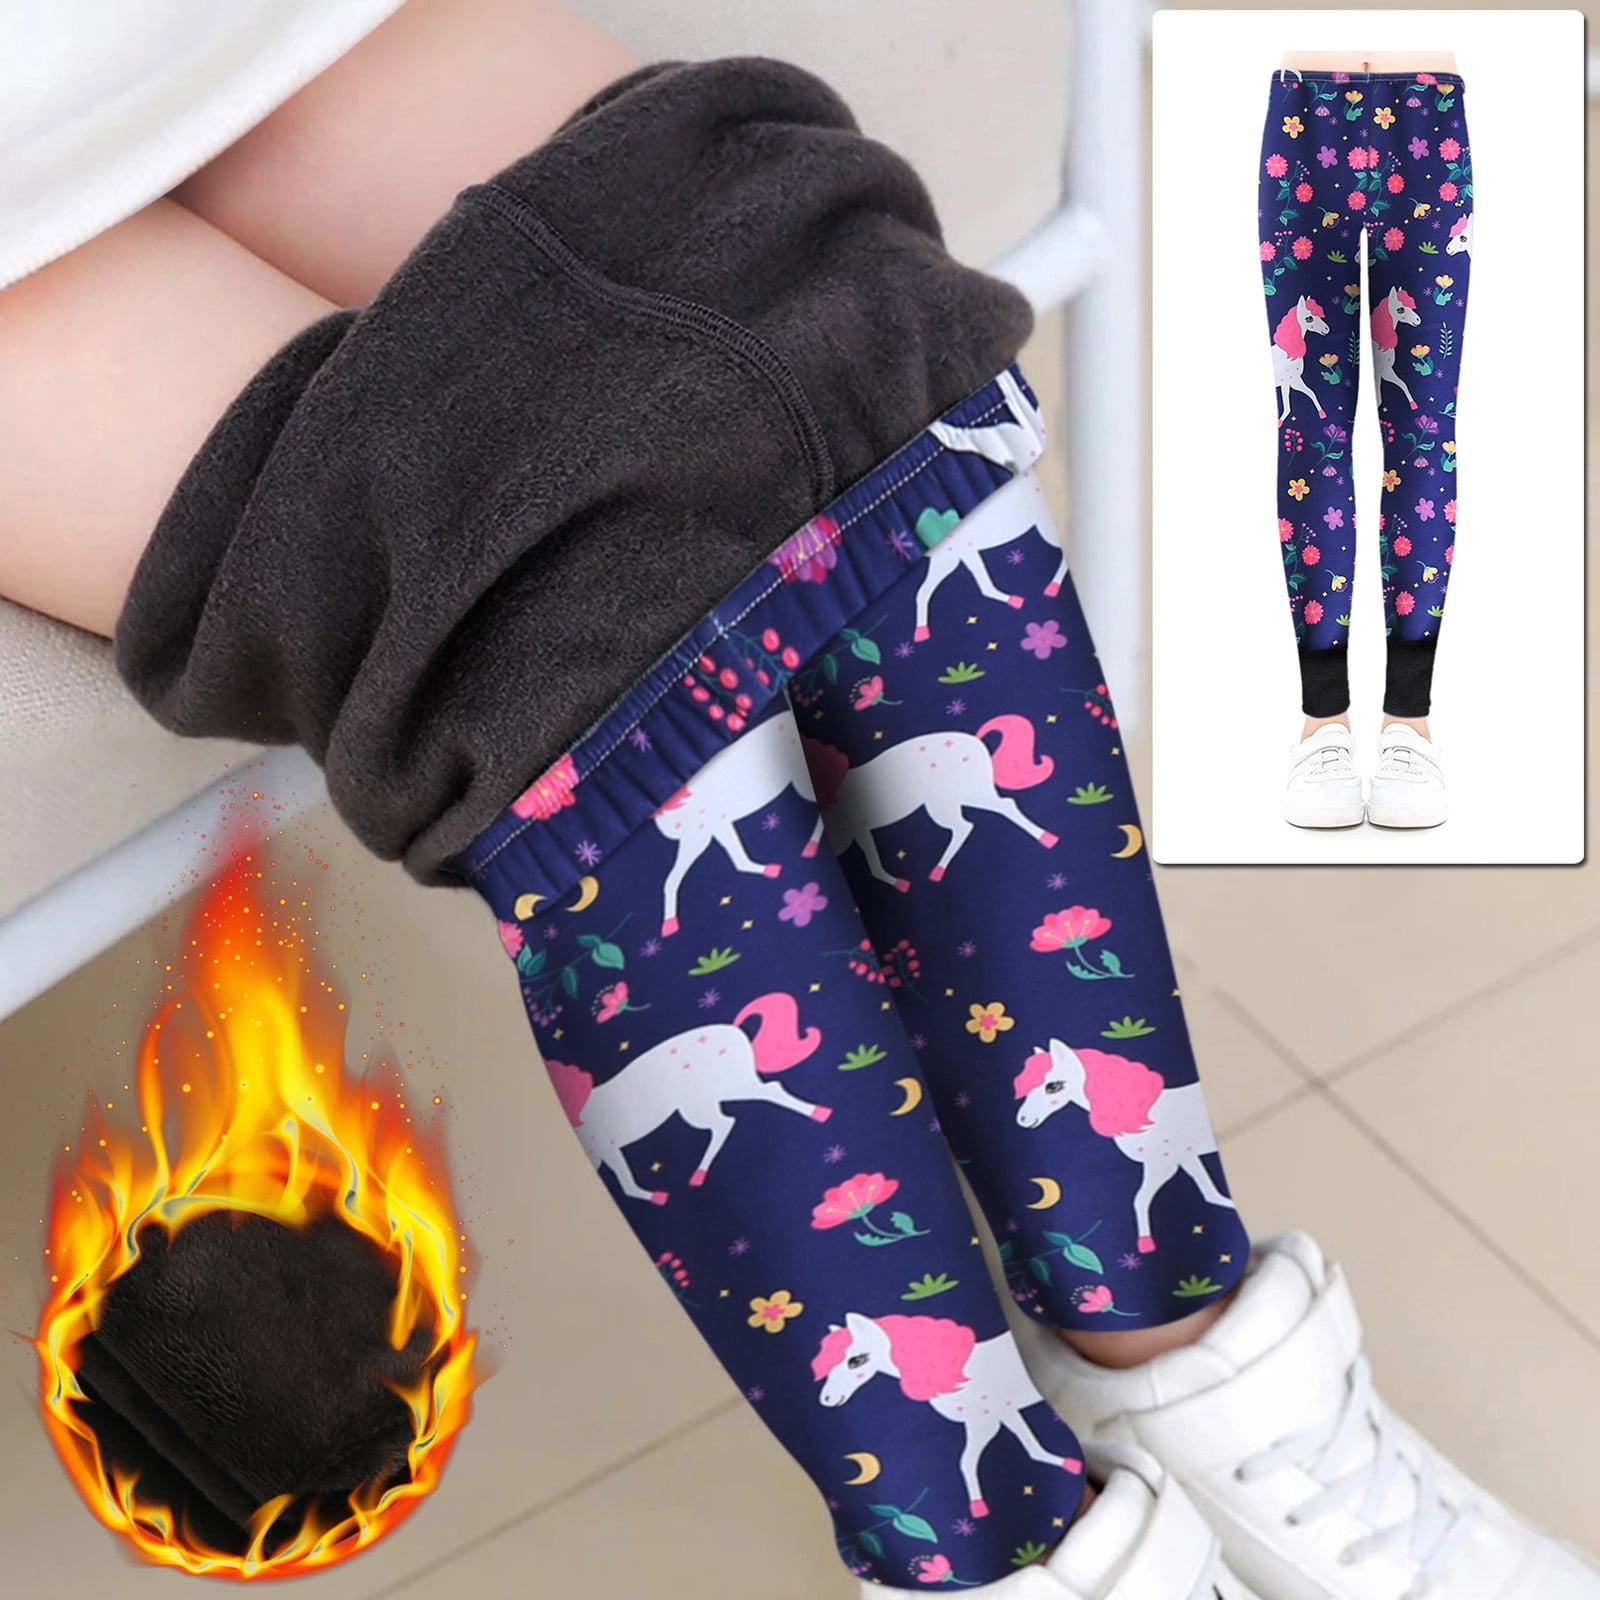 Kids Leggings for Girls Children Spring Autumn Clothes 2020 Cotton Trousers  Casual Girl Long Pants 4 6 8 10 12 14 Years - AliExpress